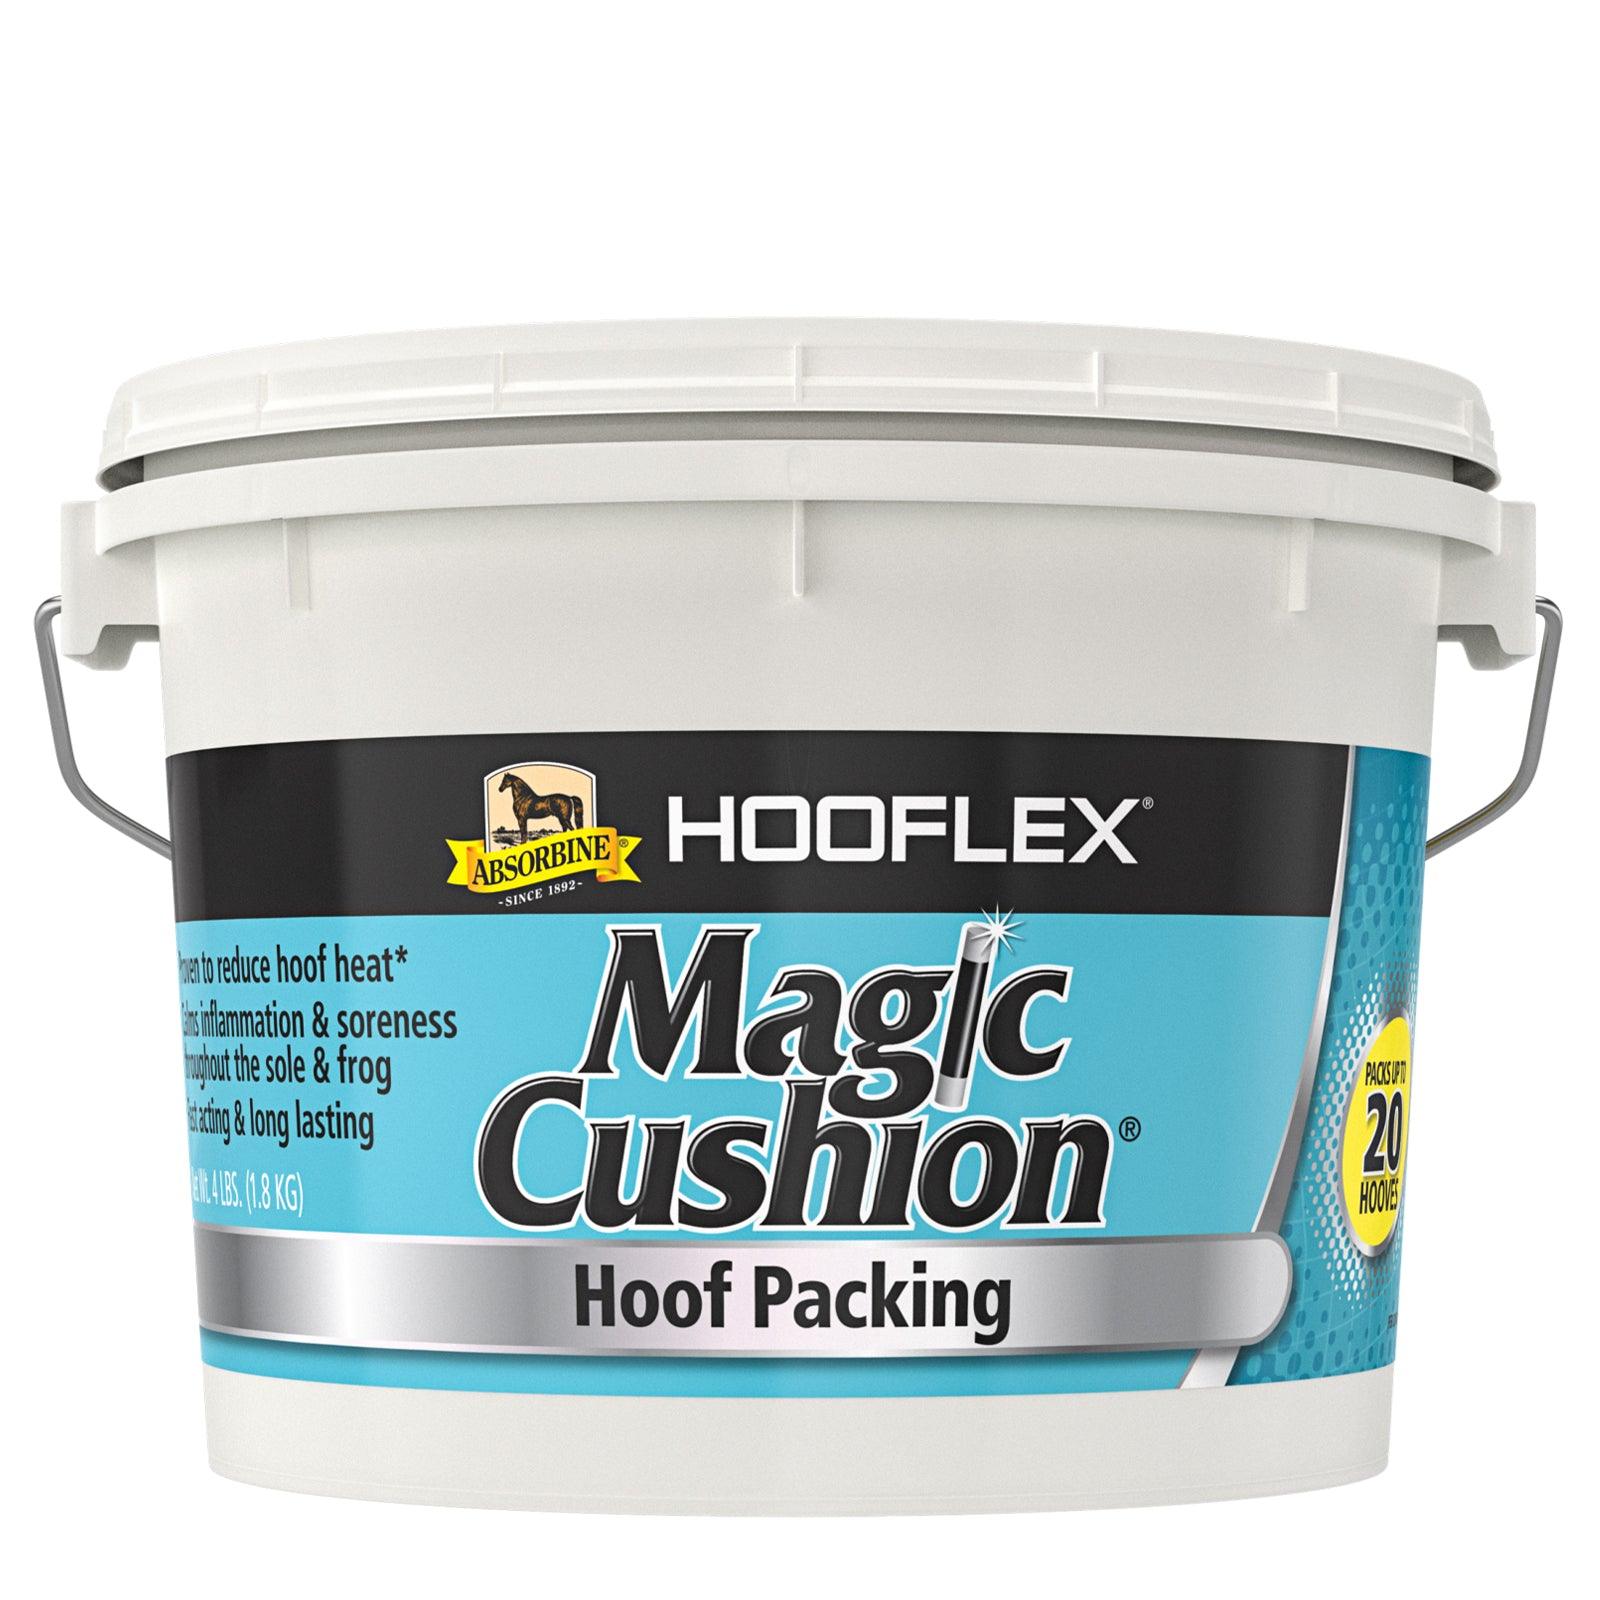 Magic Cushion Hoof Packing. Proven to reduce hoof heat. Calms inflammation & soreness throughout the sole & frog. Fast acting, long lasting. Net weight 4 pound bucket.